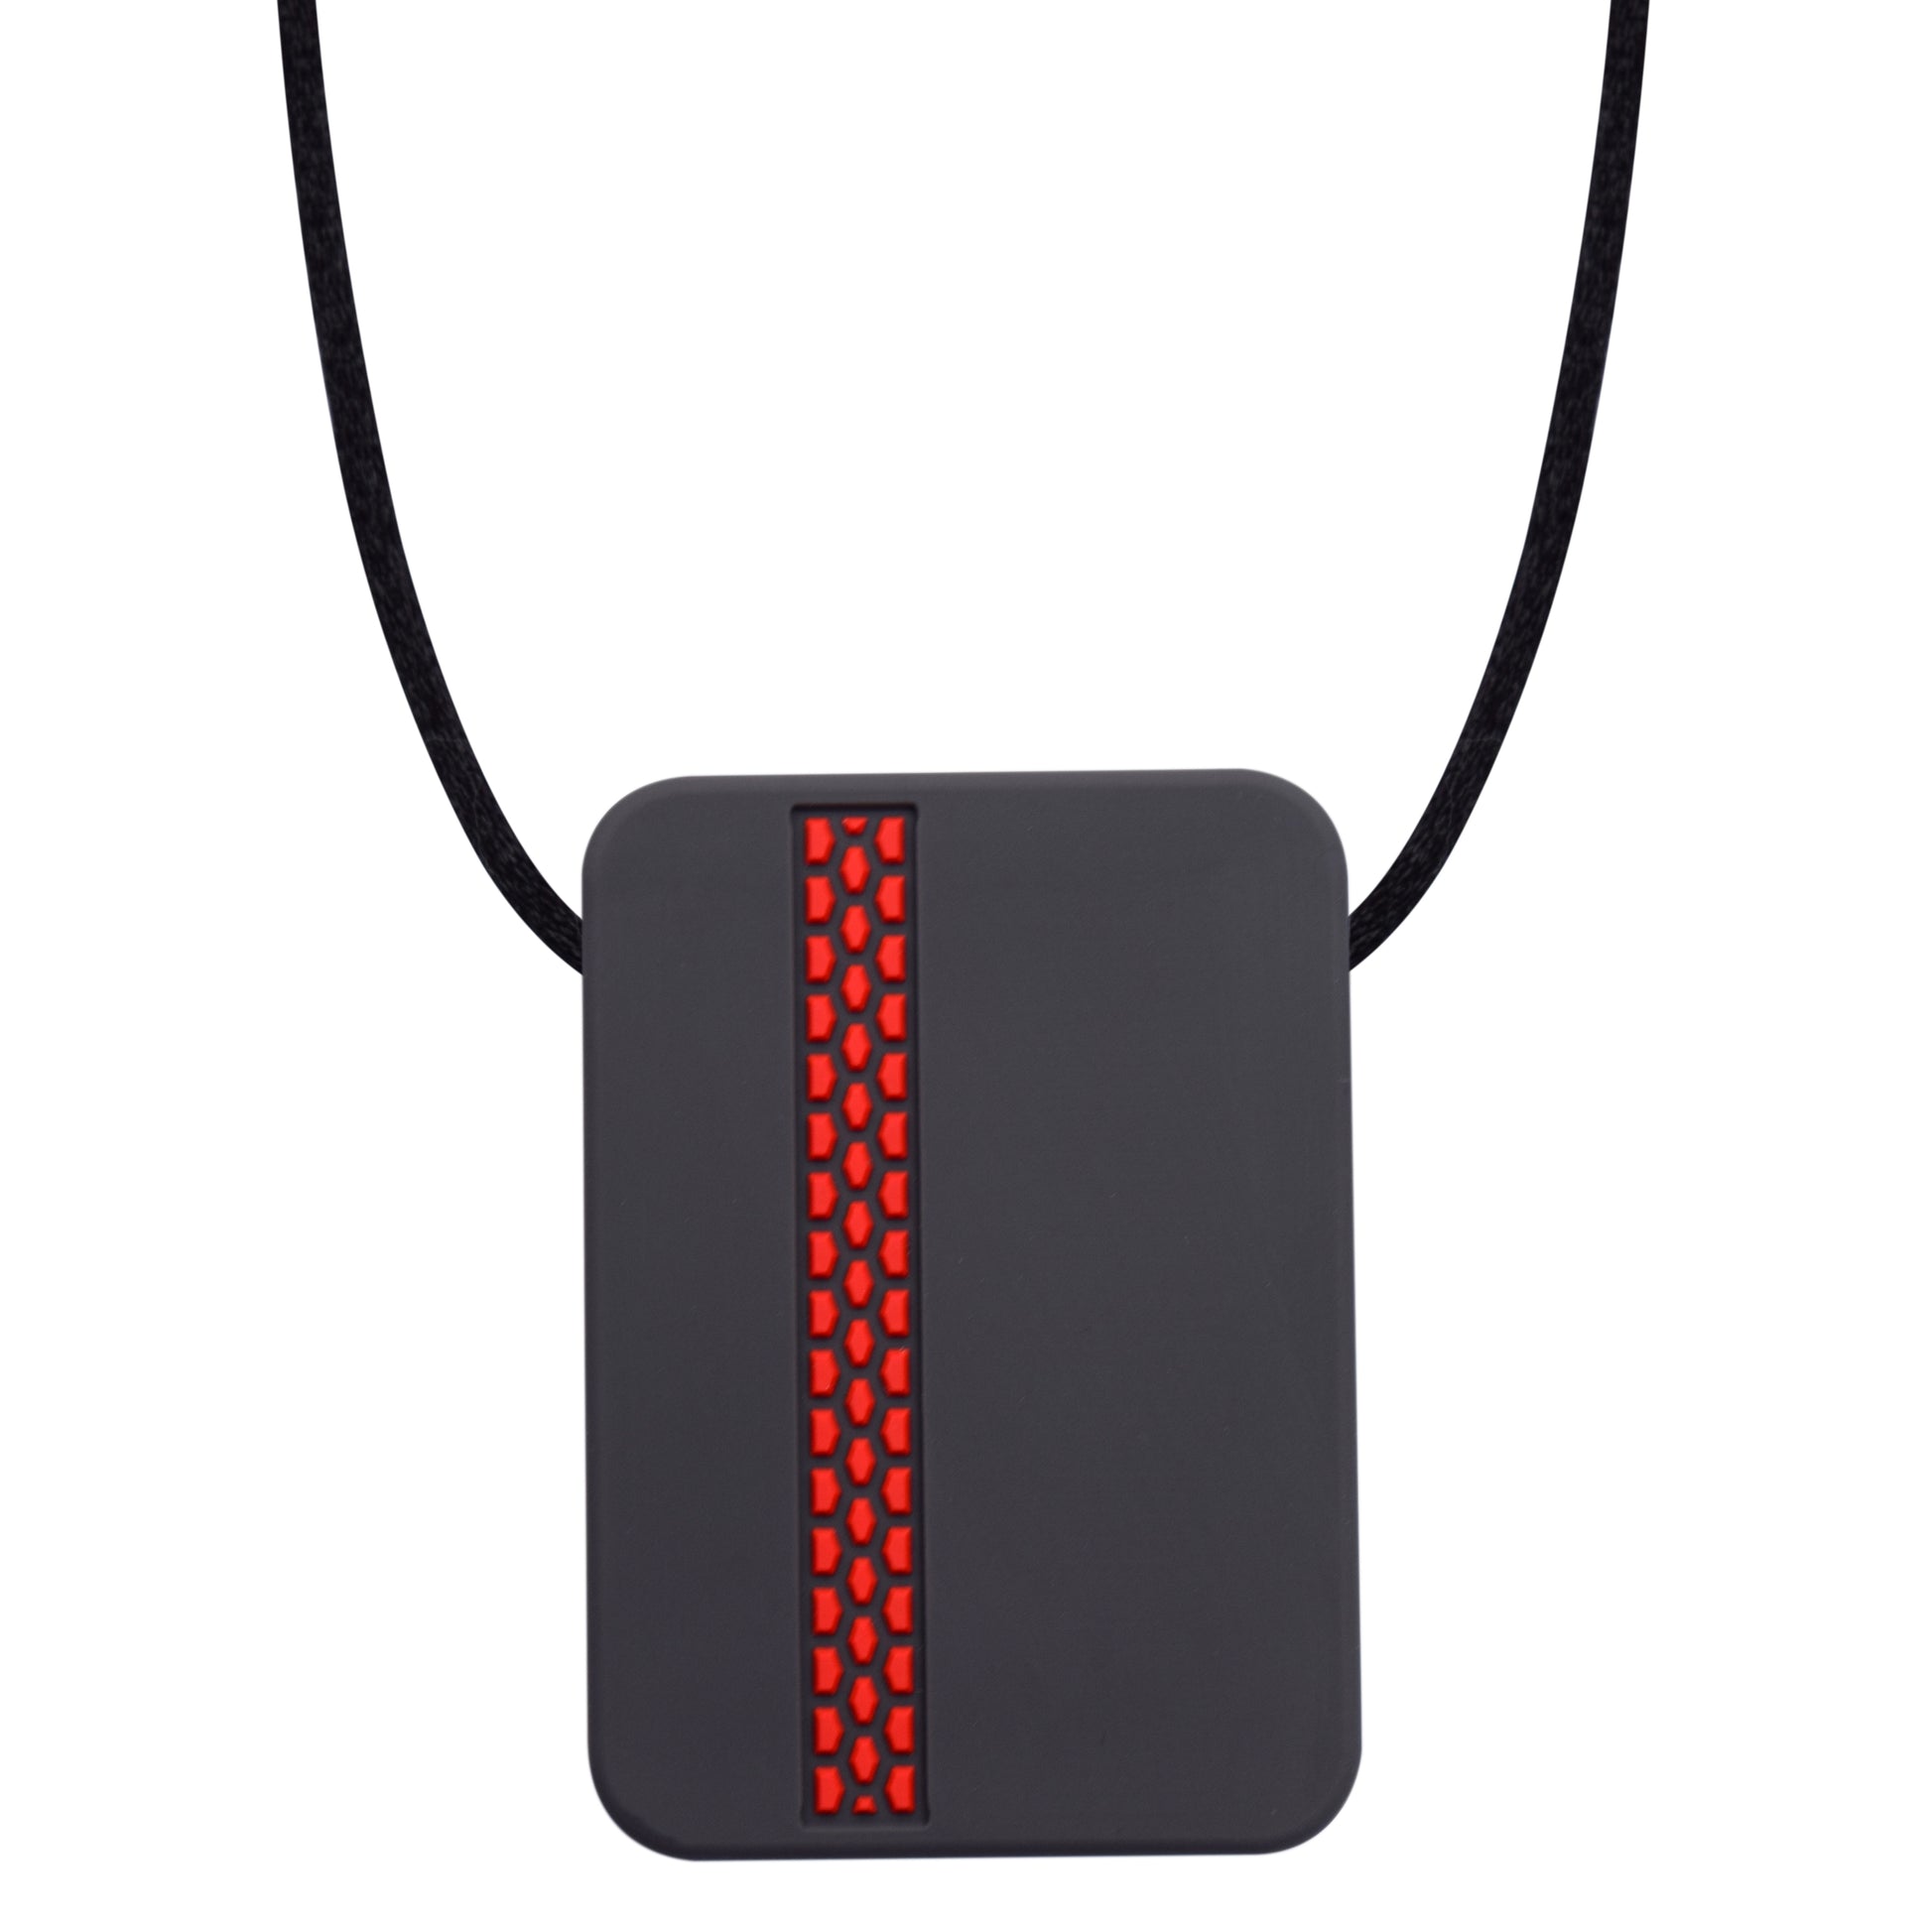 Munchables adult chew necklace in rectangle shape with red tire strip down one side.